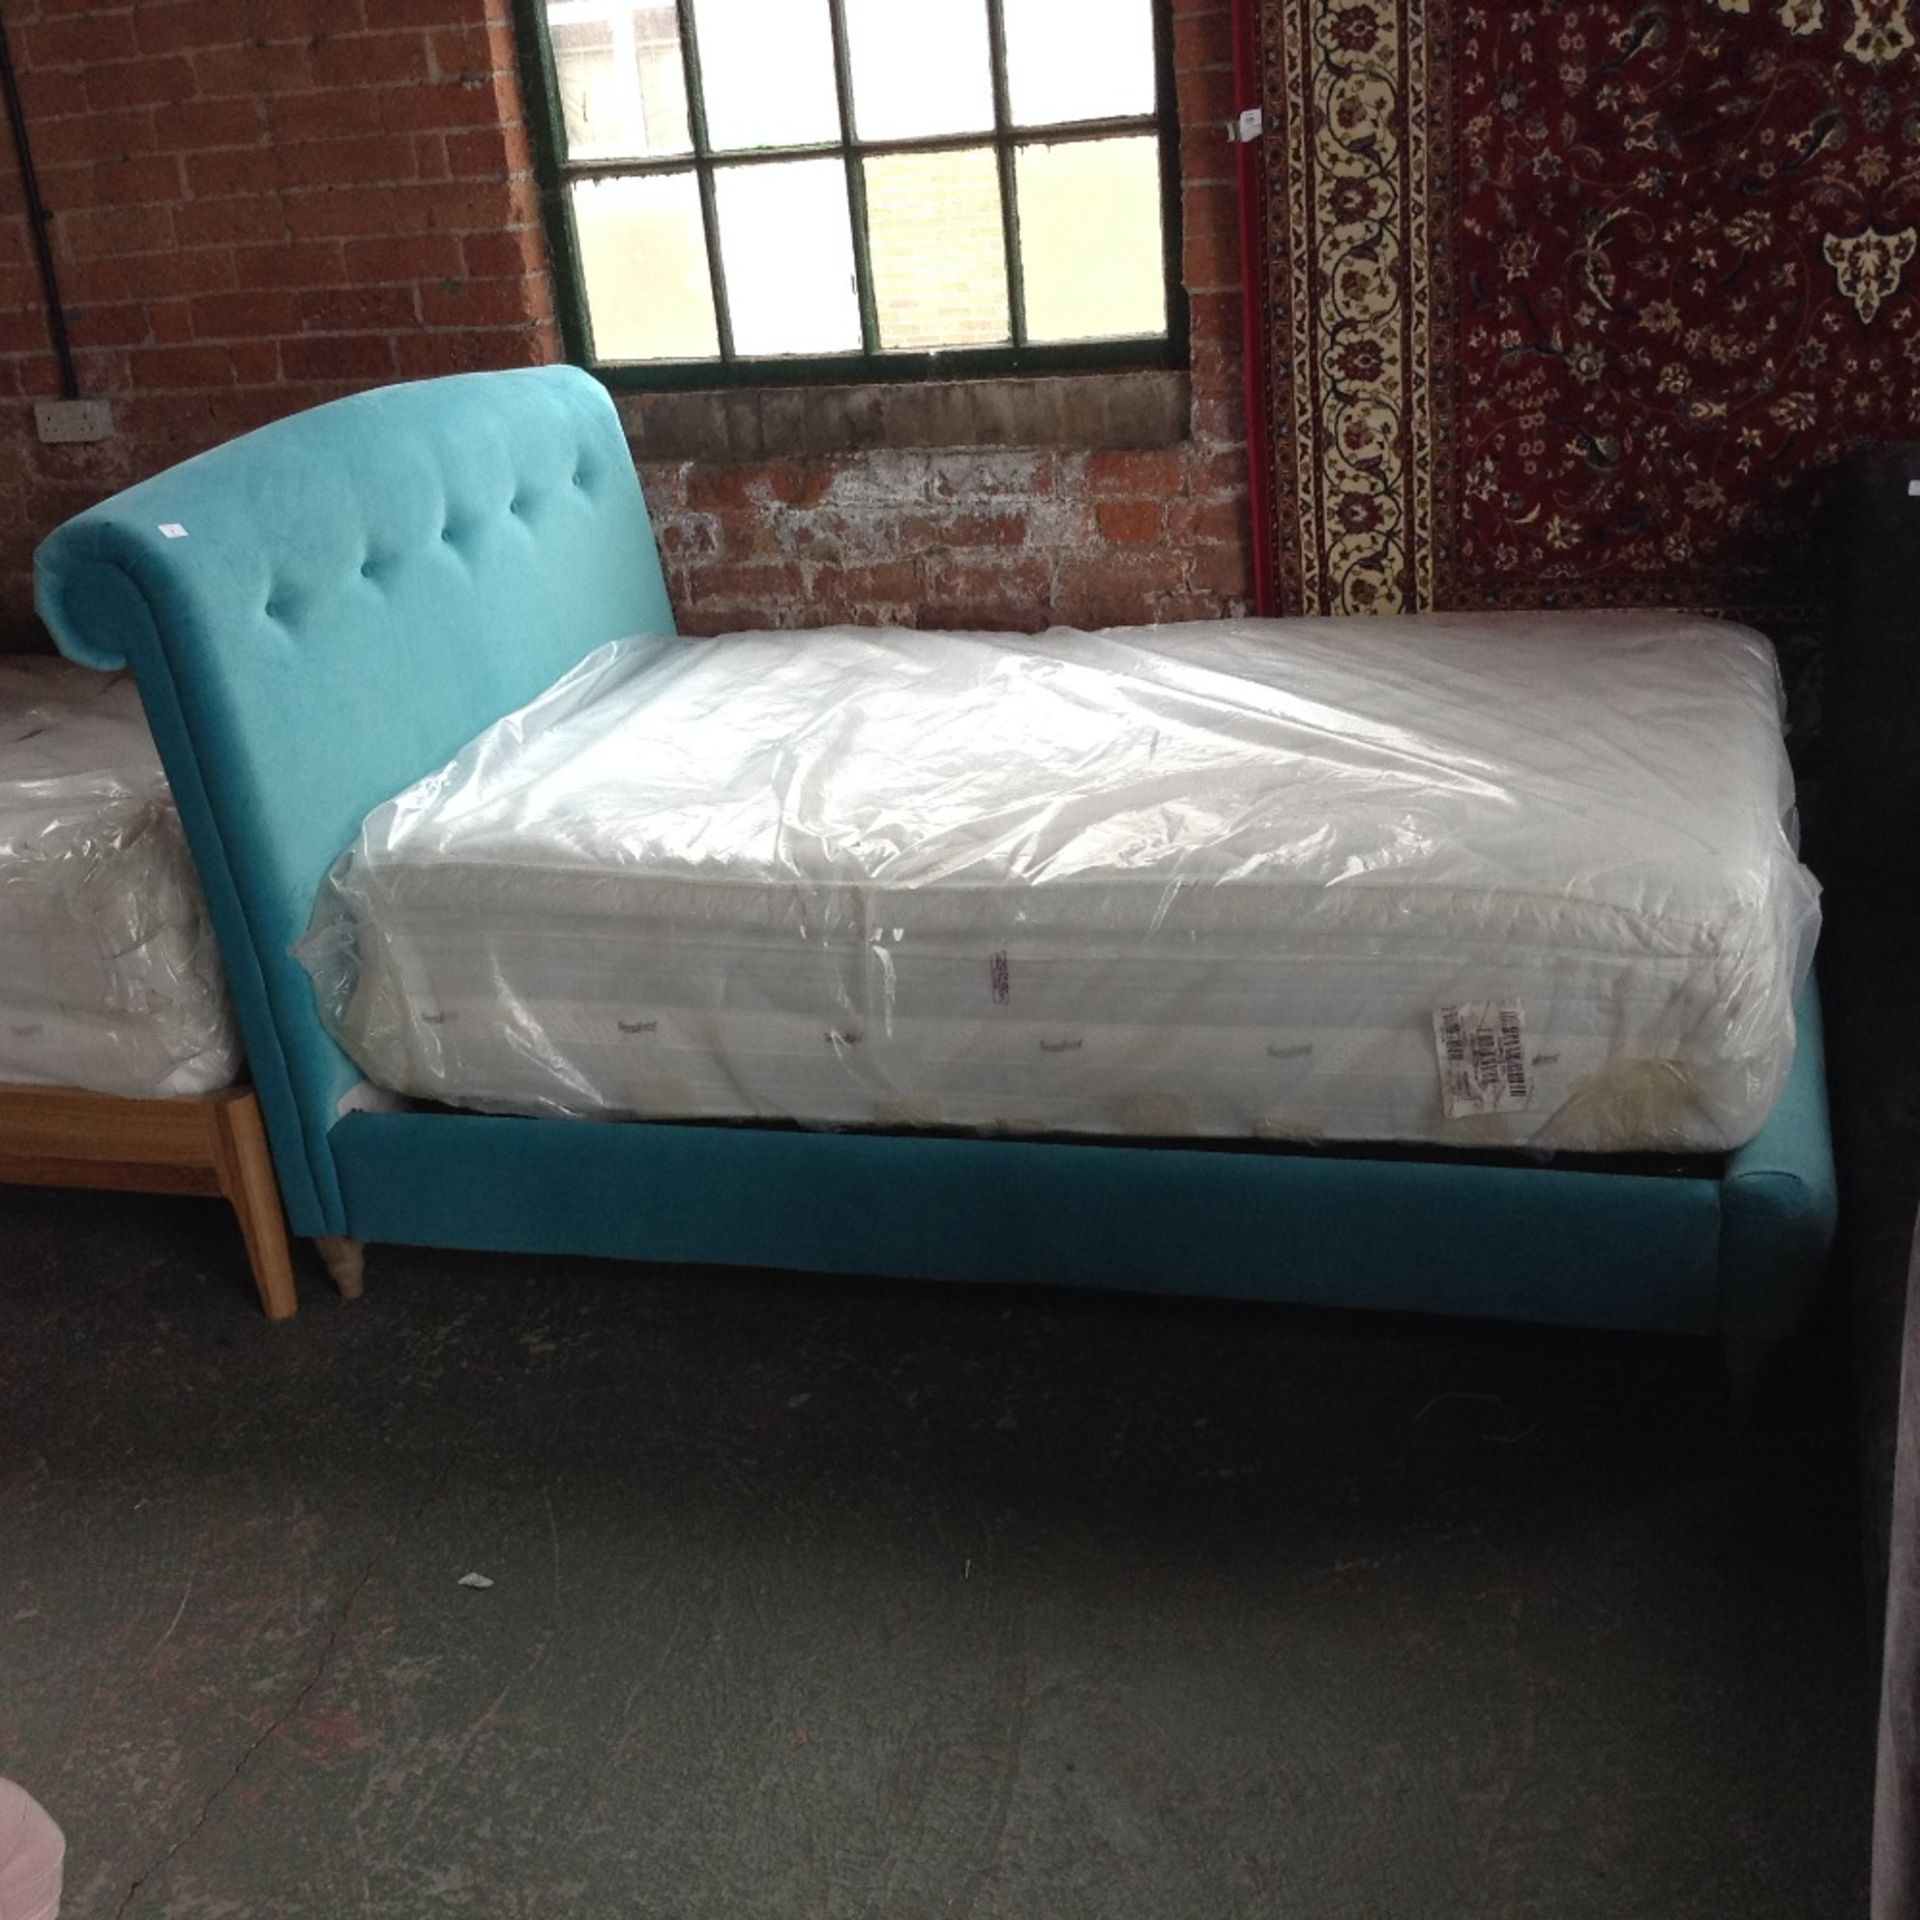 TEAL UPHOLSTERED DOUBLE BED FRAME